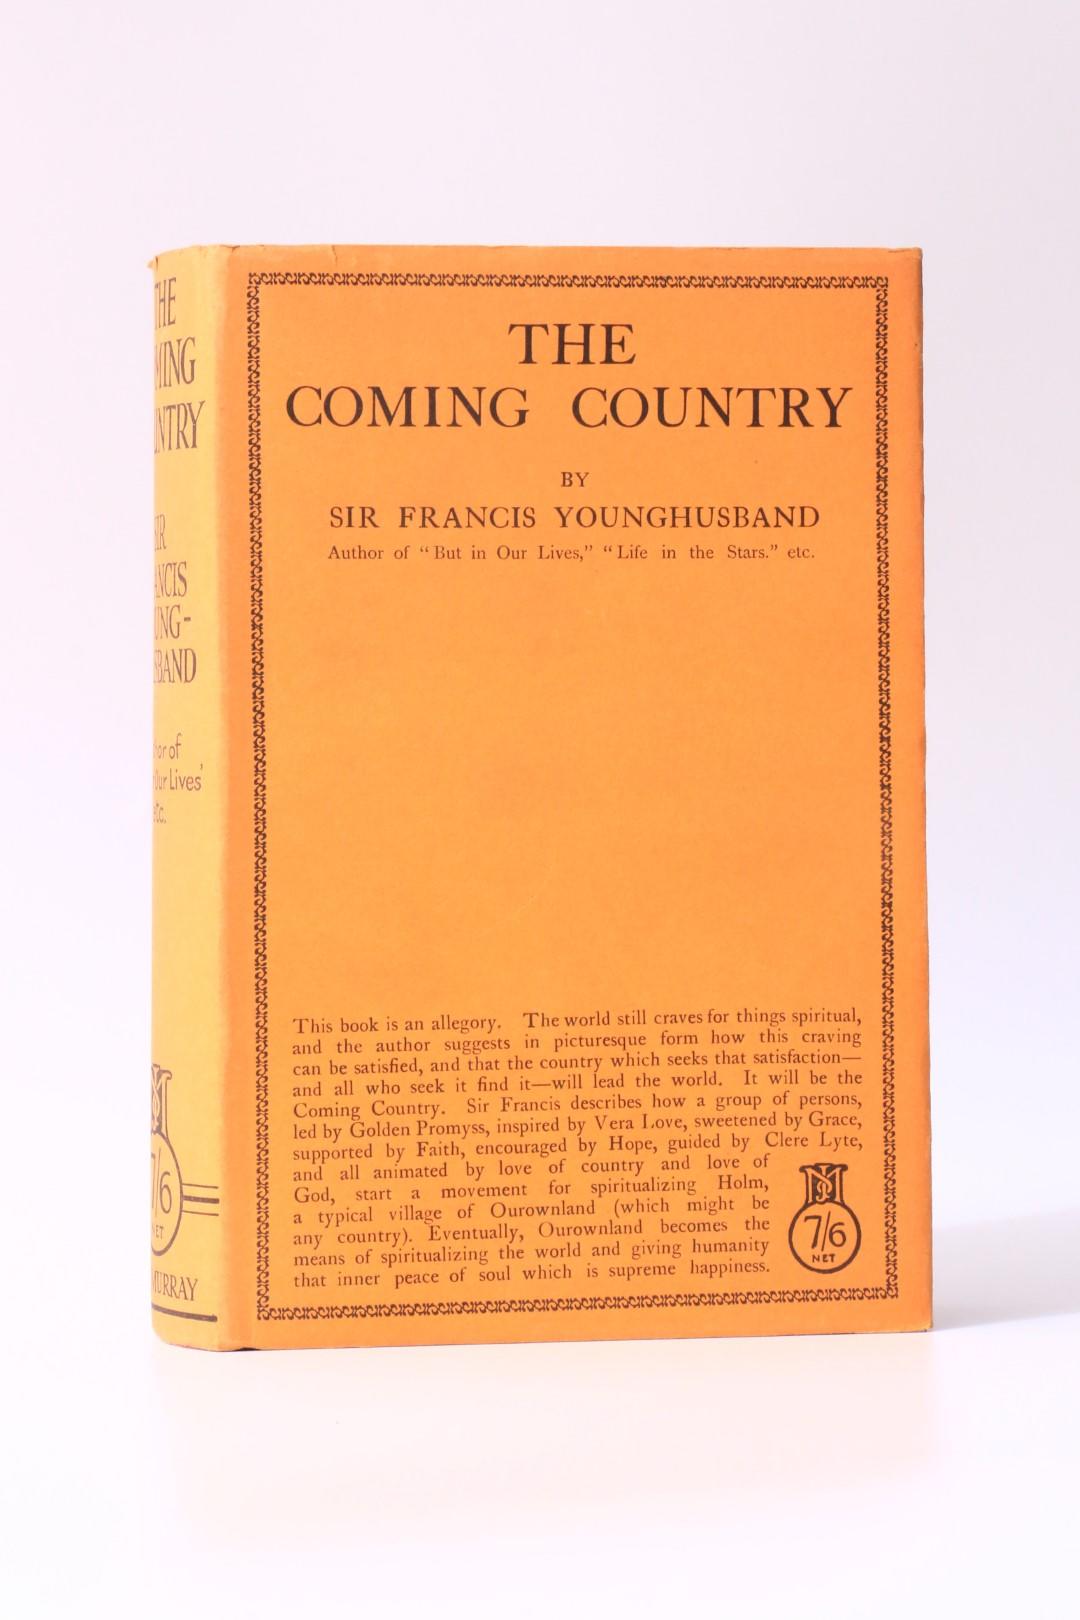 Francis Younghusband - The Coming Country - John Murray, 1928, Signed First Edition.